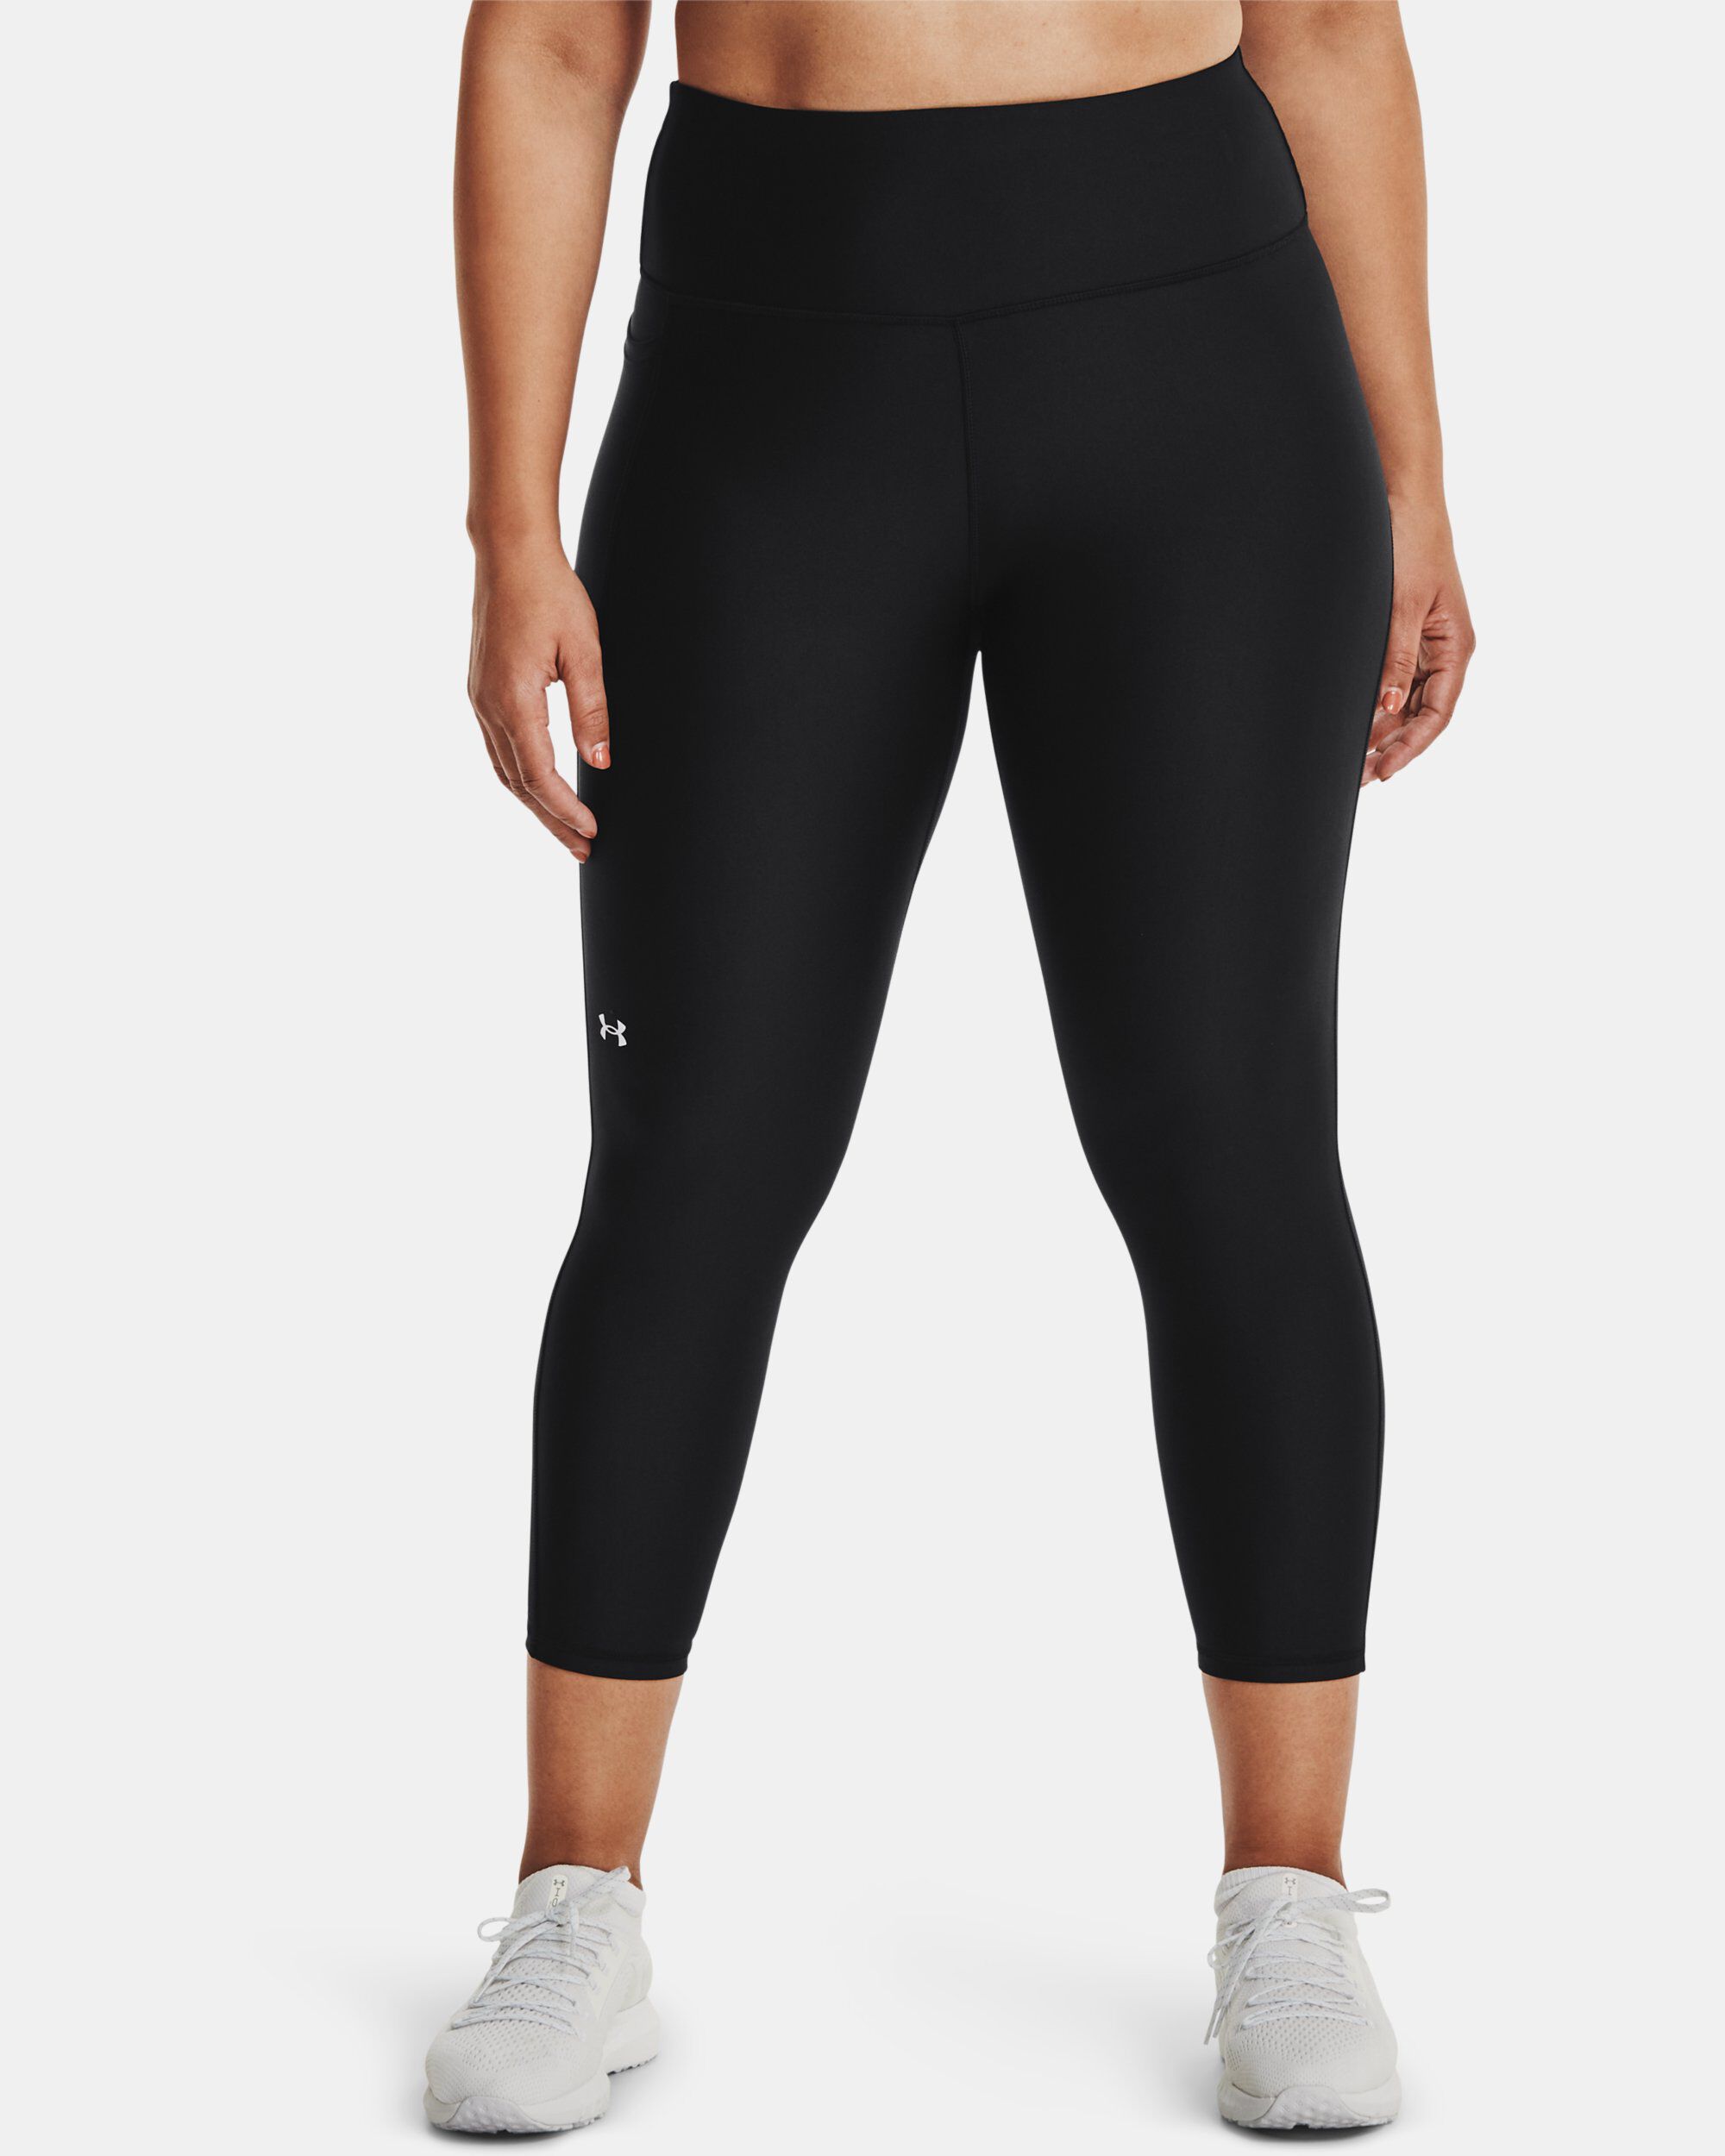 Under Armour Solid Black Leggings Size M - 59% off